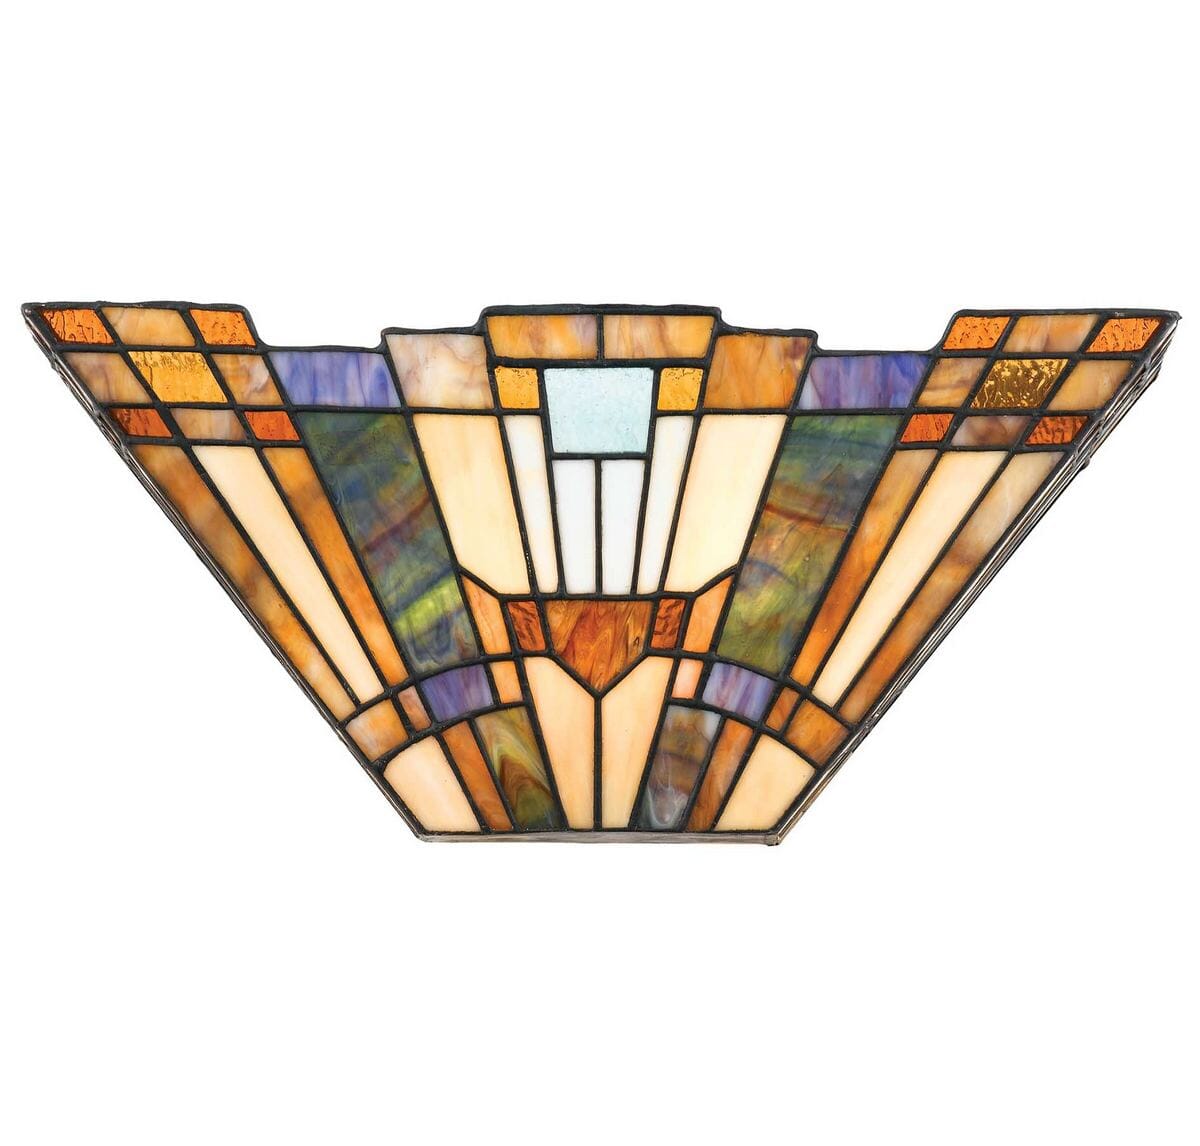 4 Wall Sconces to Match Your Dining Room Chandelier from LightsOnline - LightsOnline Blog